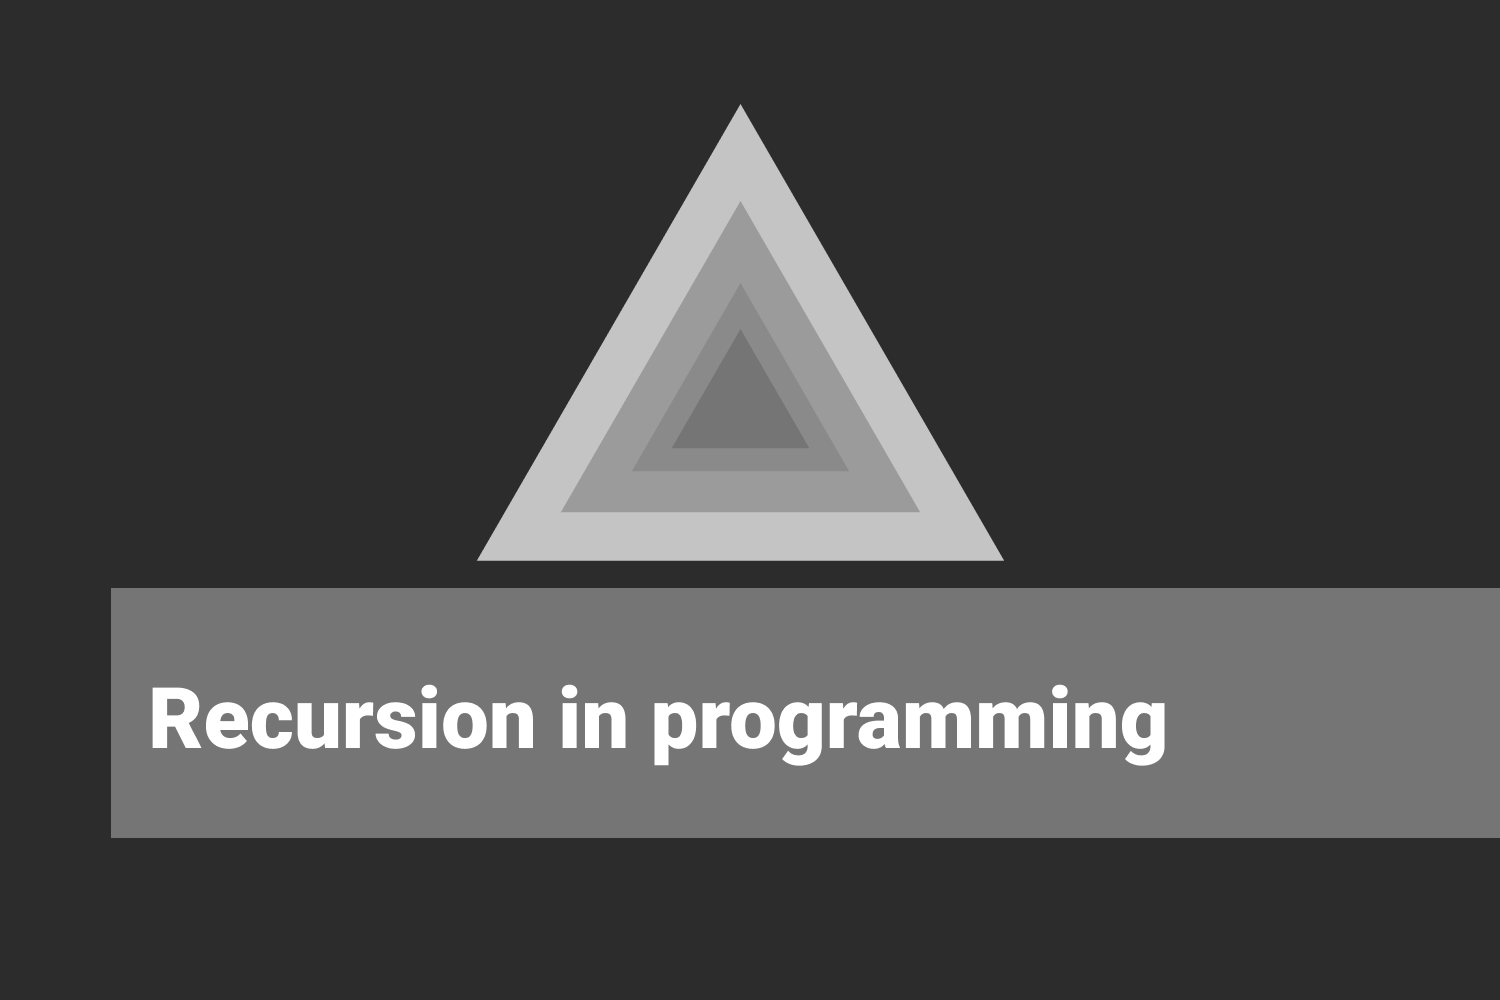 What is recursion in programming?